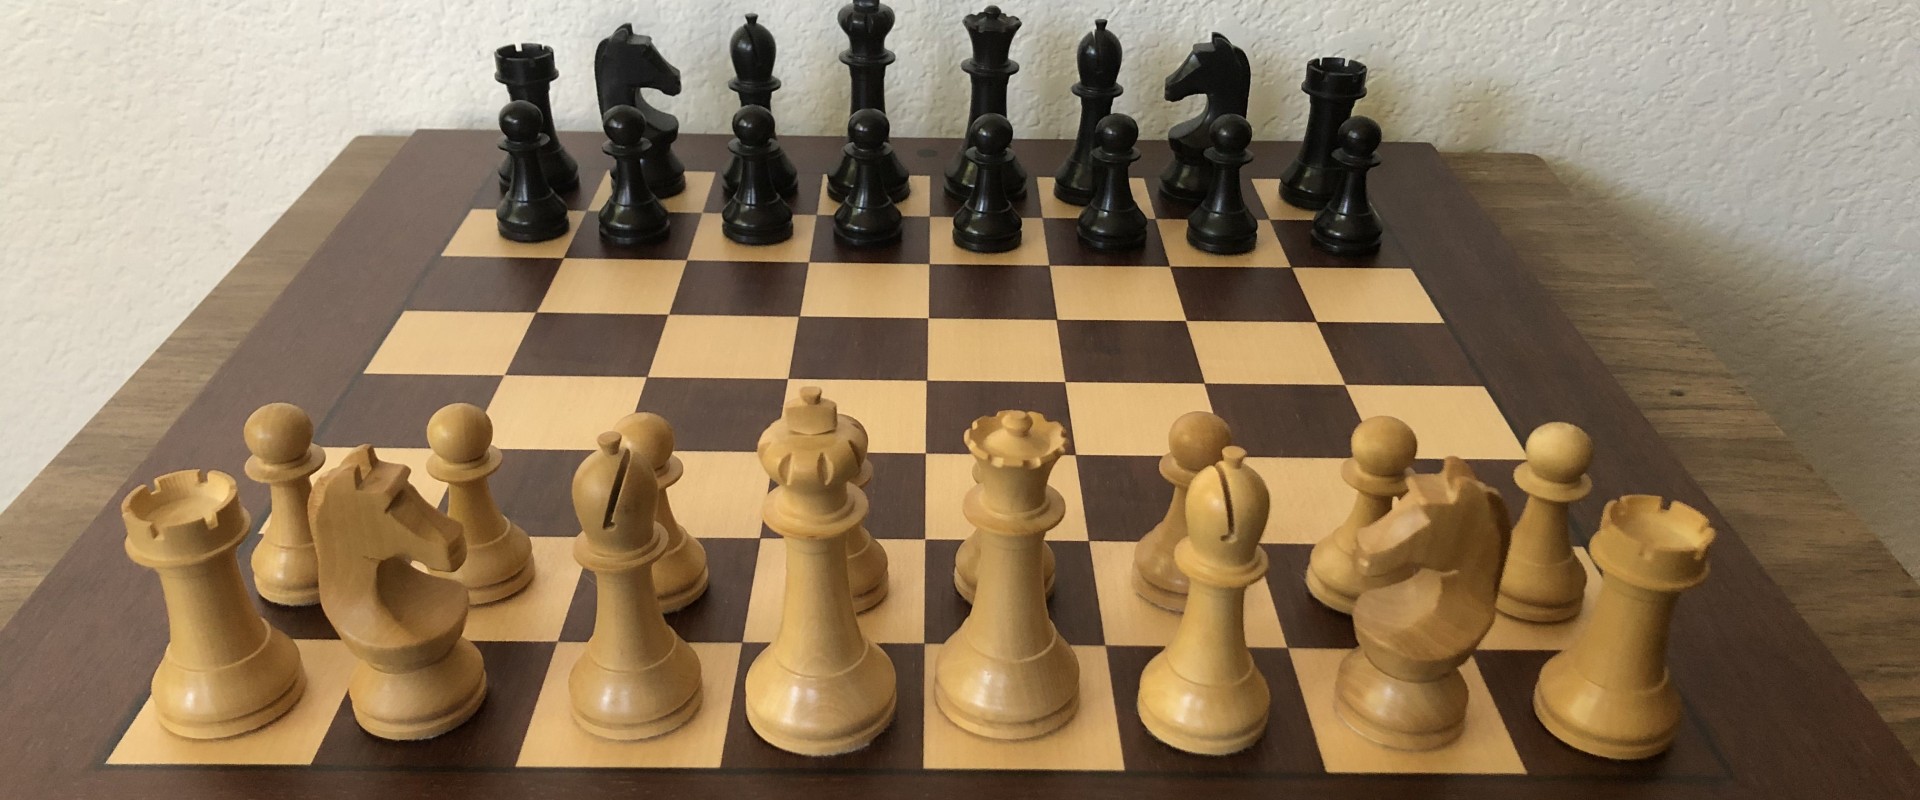 Where To Find The Best Chess Sets